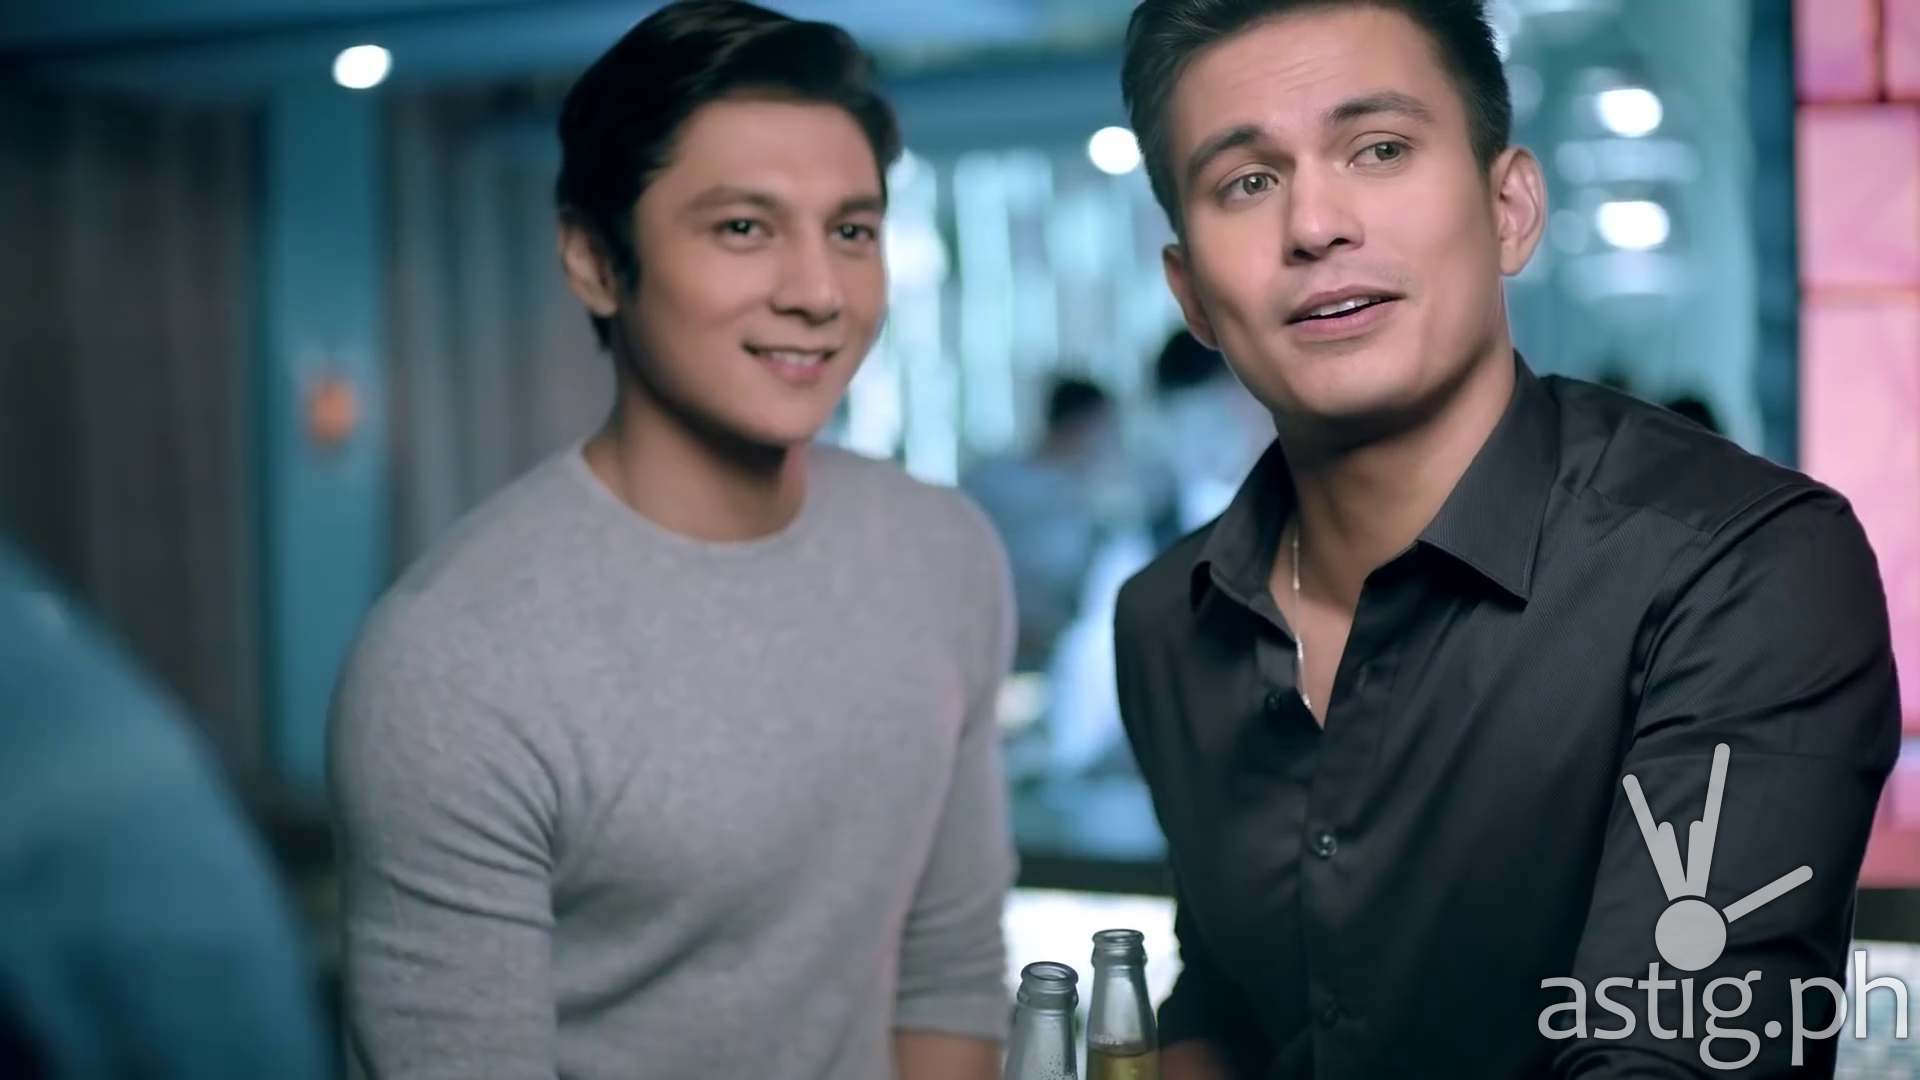 Are alpha bros Joseph C Marco and Tom Rodriguez hitting on girls ... or is it the other way around?